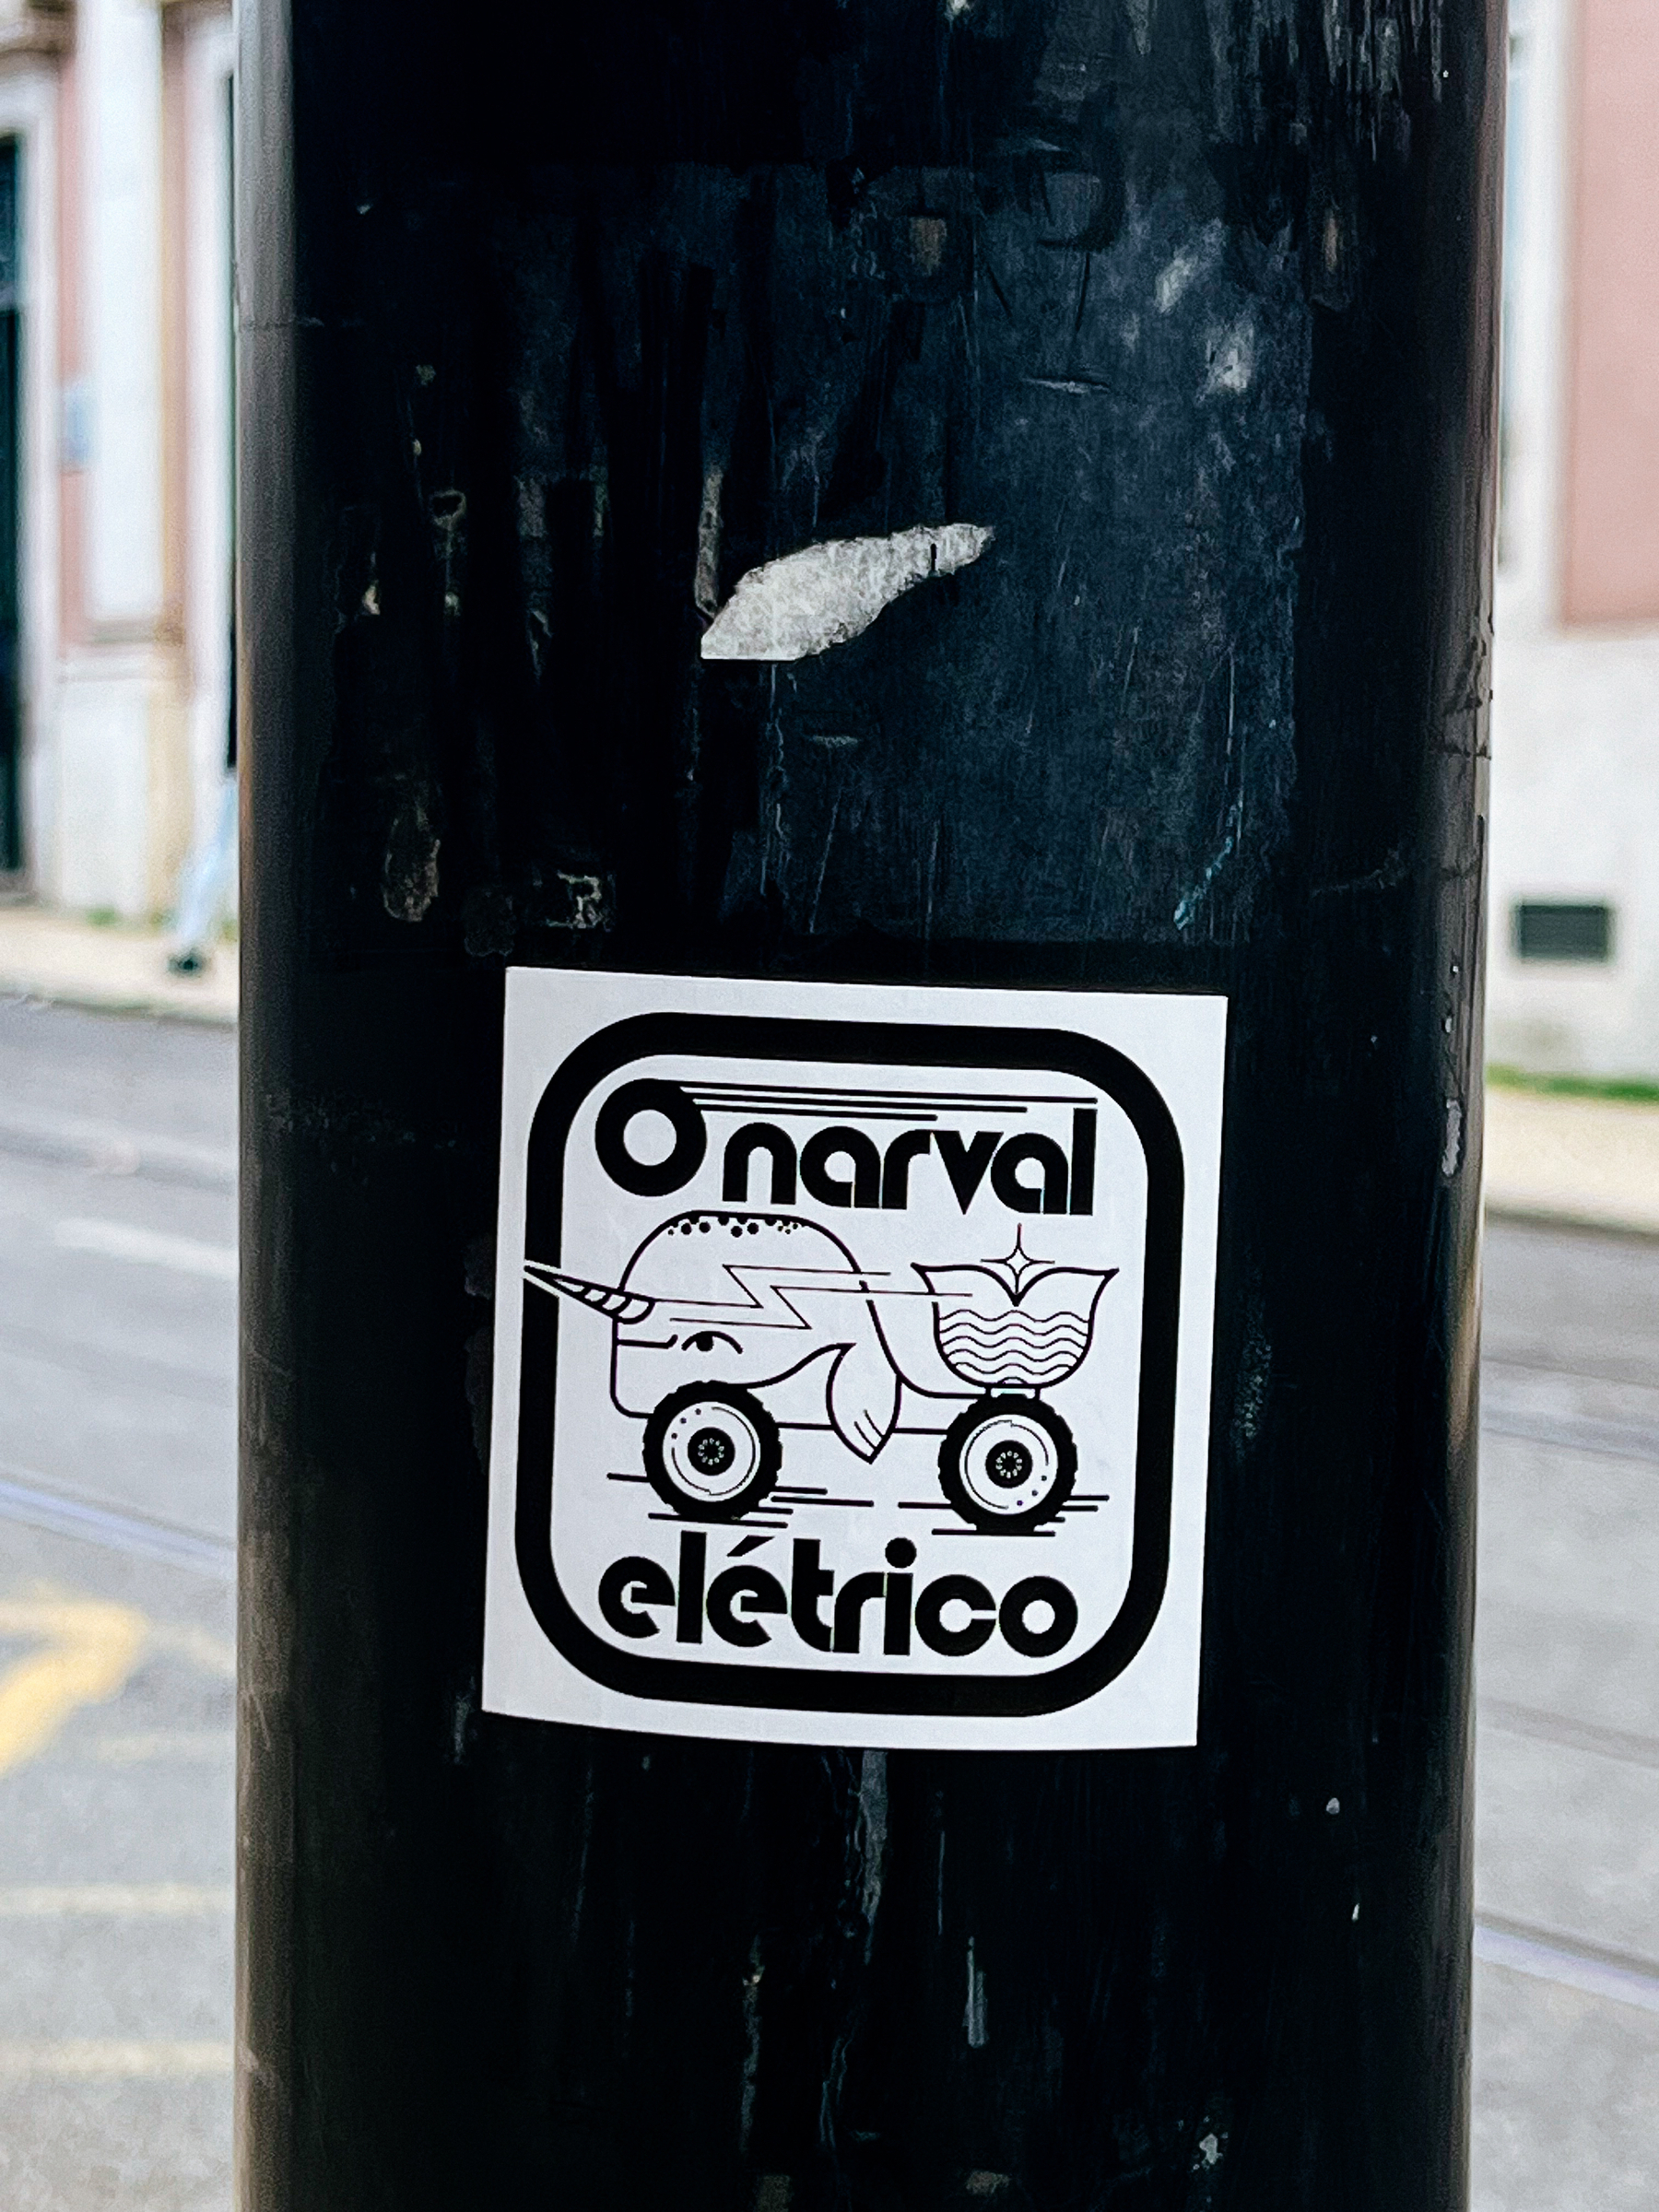 A sticker on a dark pole depicts a cartoon narwhal on wheels with the text &ldquo;O narval eléctrico&rdquo;.